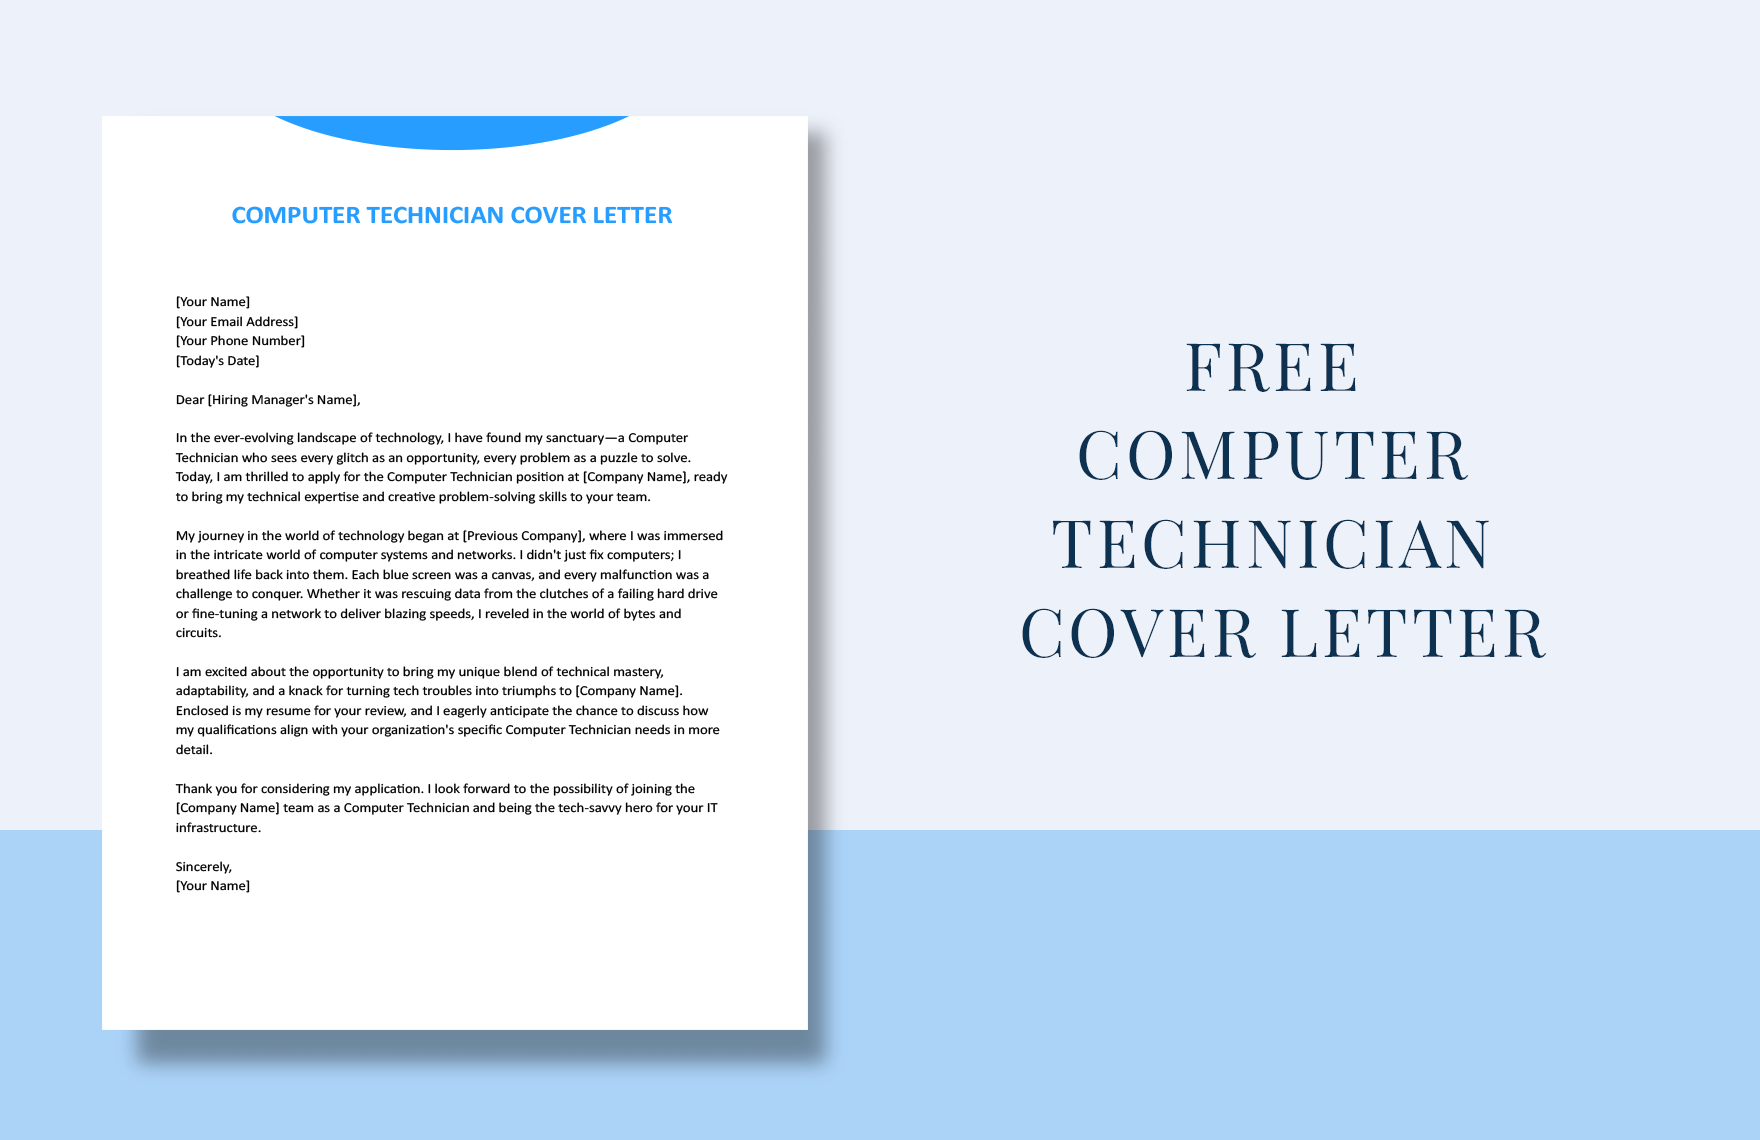 Computer Technician Cover Letter in Word, Google Docs